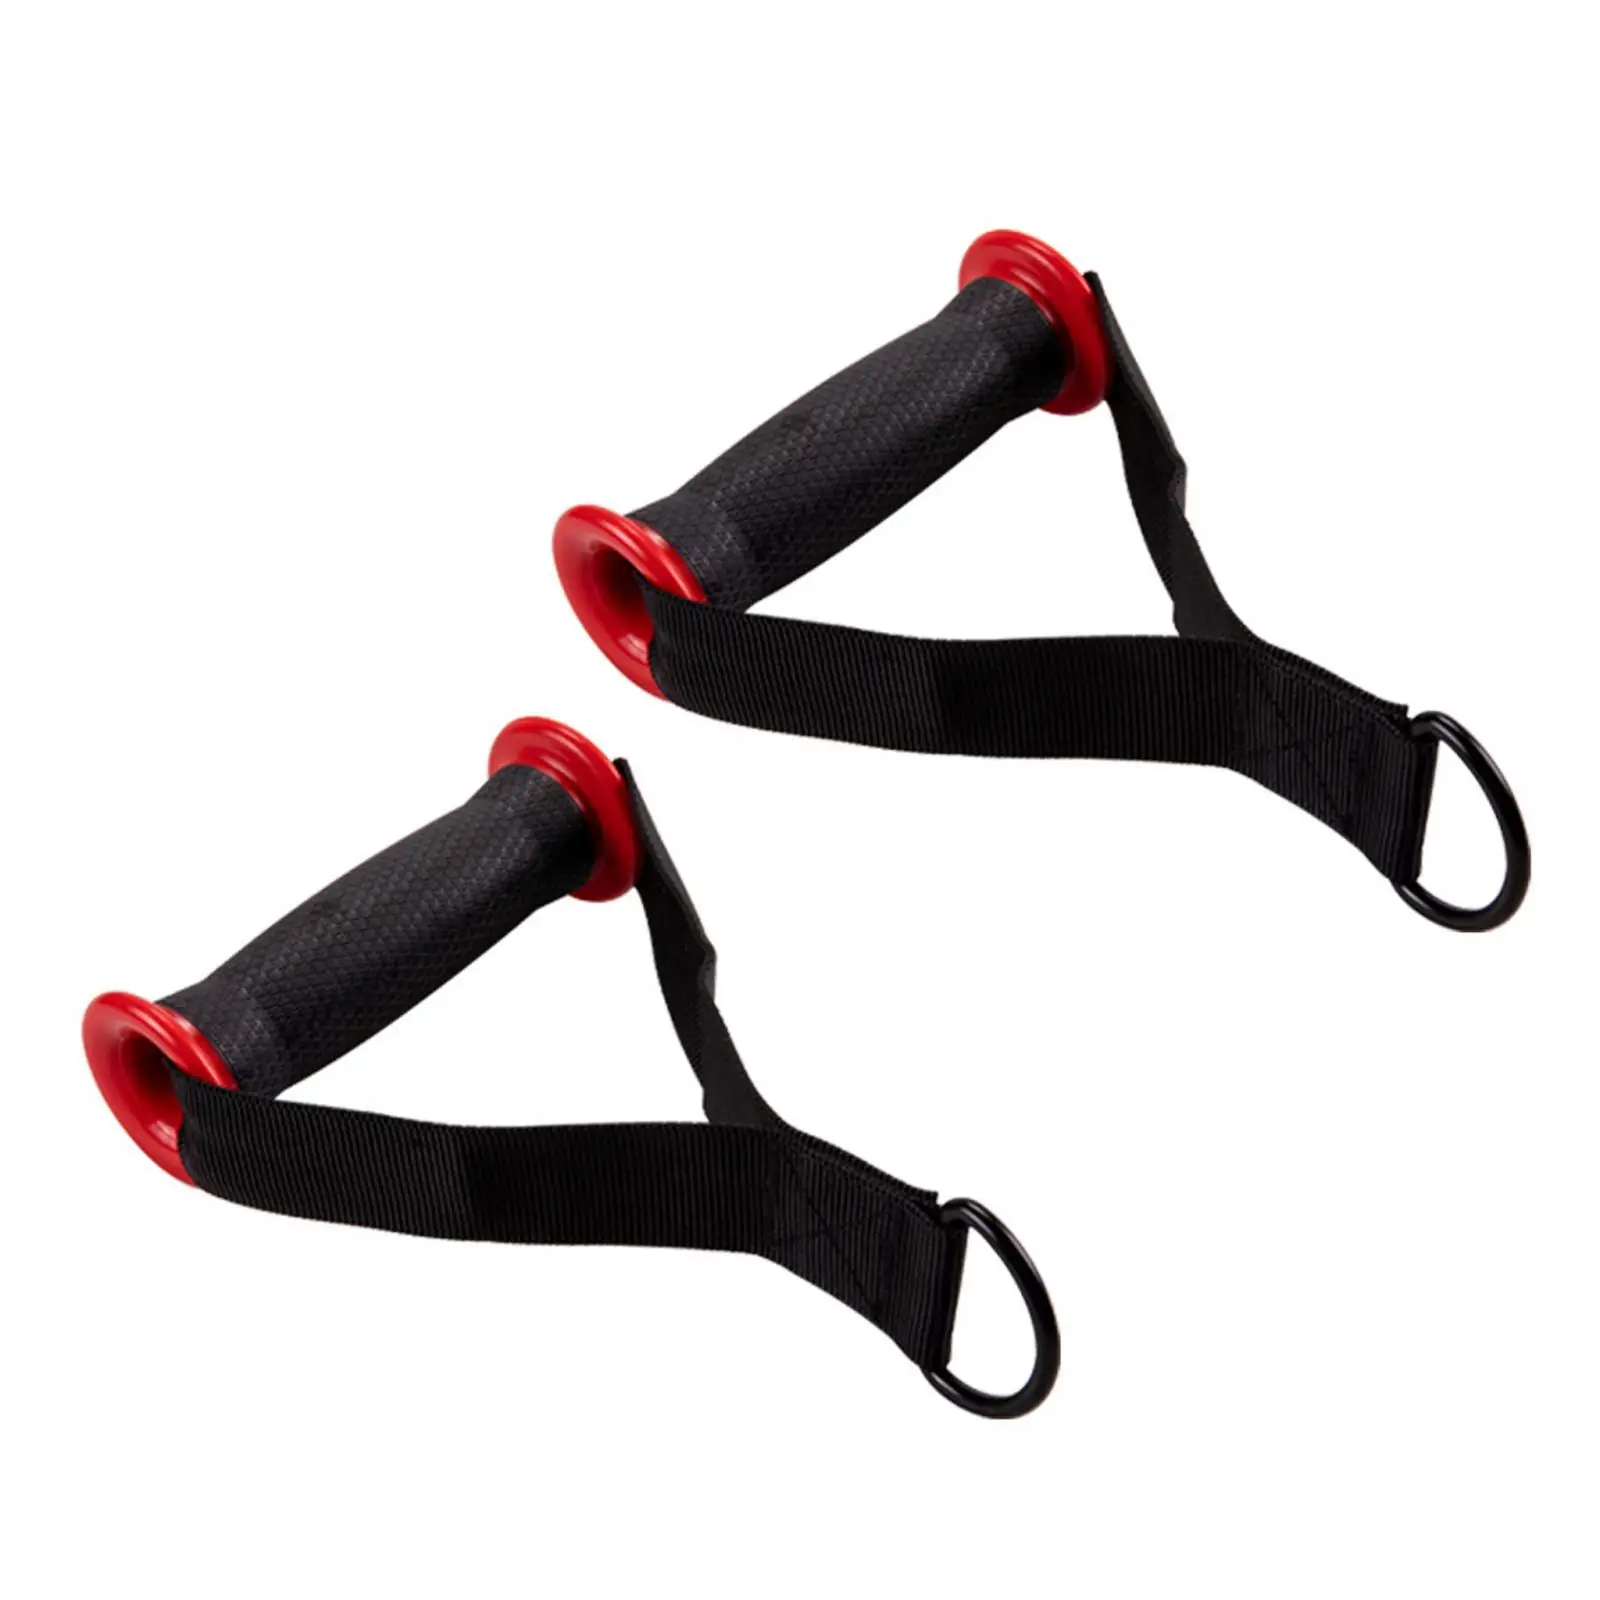 2Pcs Gym Handle Body Fitness Resistance Exercise Attachment Stirrup Ab Workout Push Pull Pull Band Handles Fitness Straps